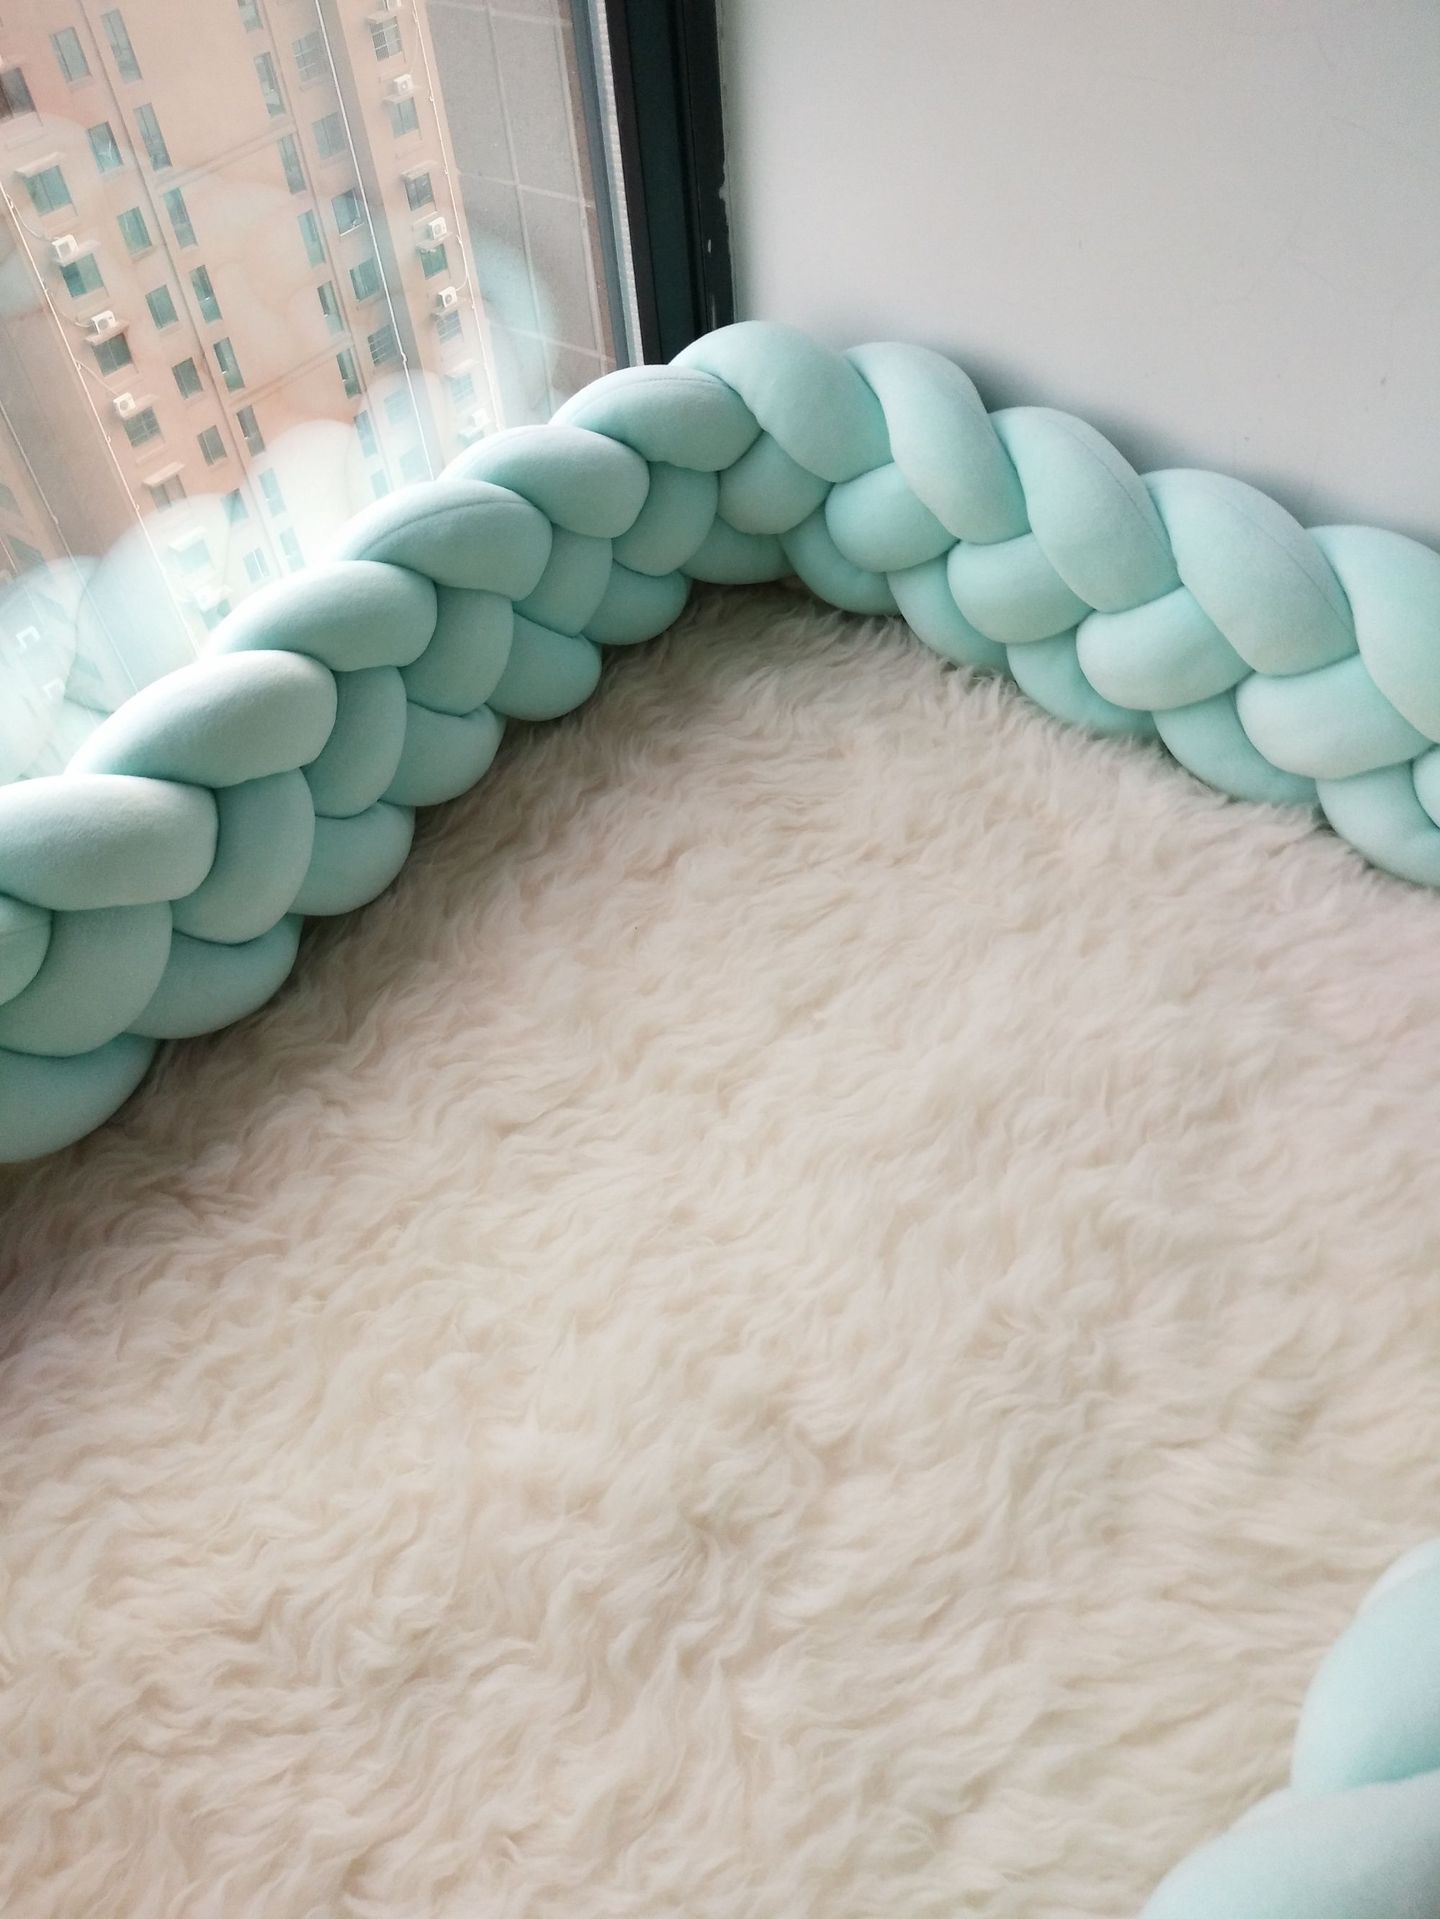 INS POP 4-Strand Long Knotted Twist Braid Bed Fence Woven Baby Fence Baby Anti-Collision Fall Fence Children's Safety